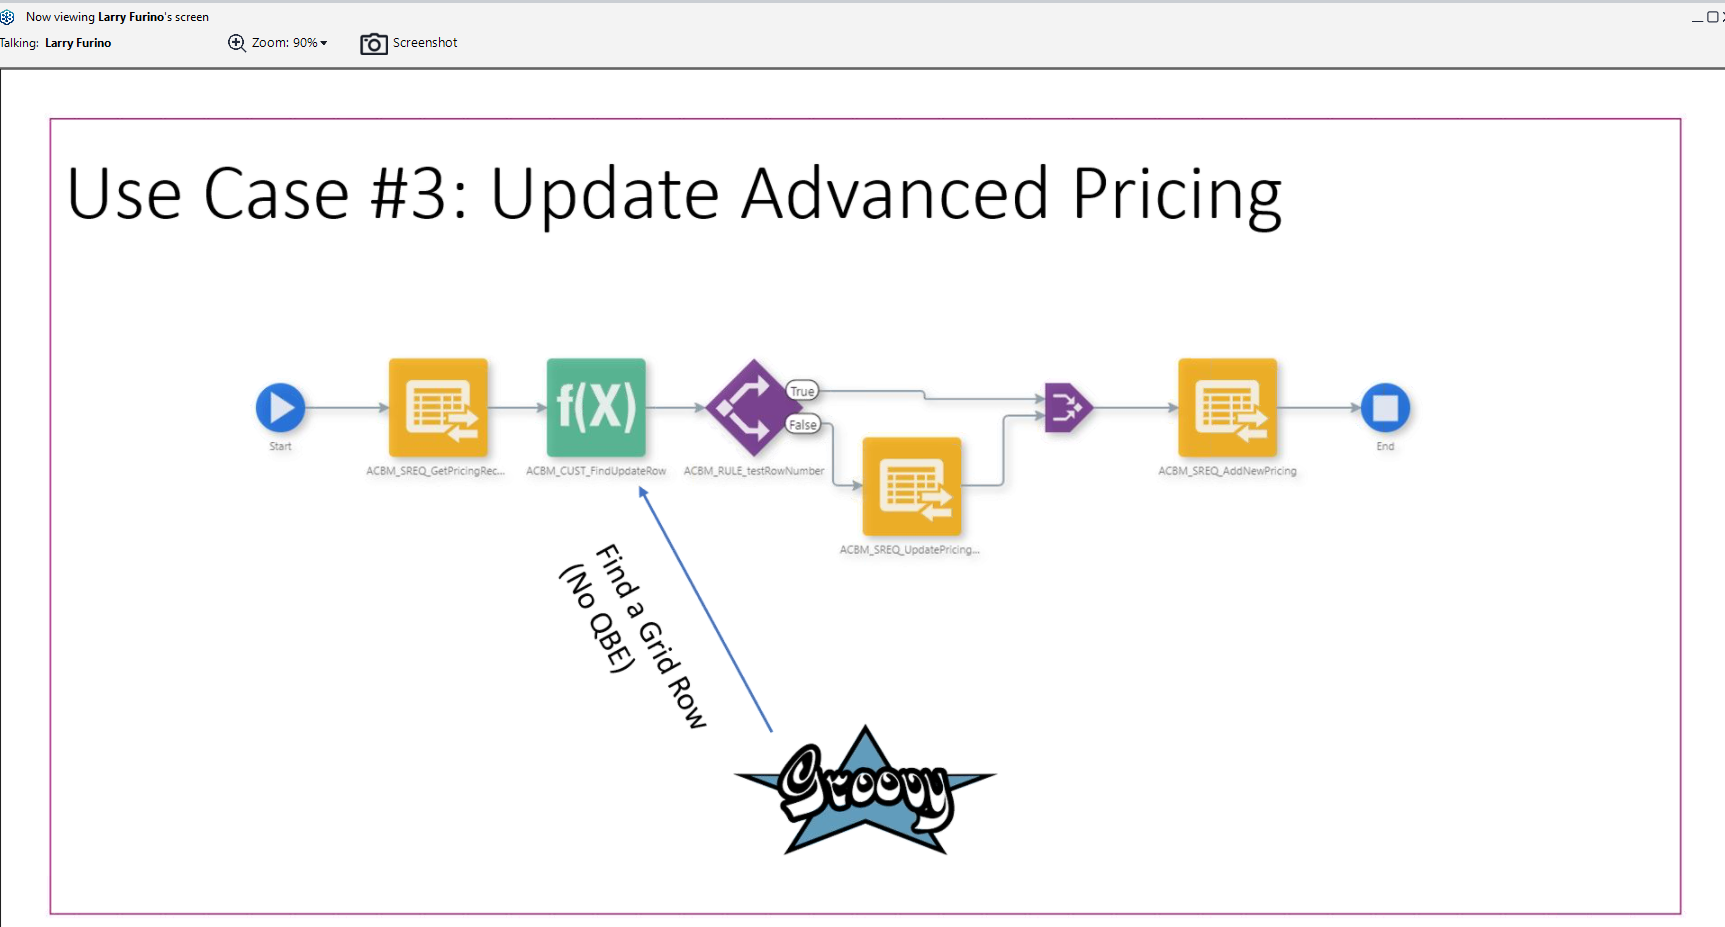 Use Case # 3 Update JD Edwards Orchestrator Advanced Pricing